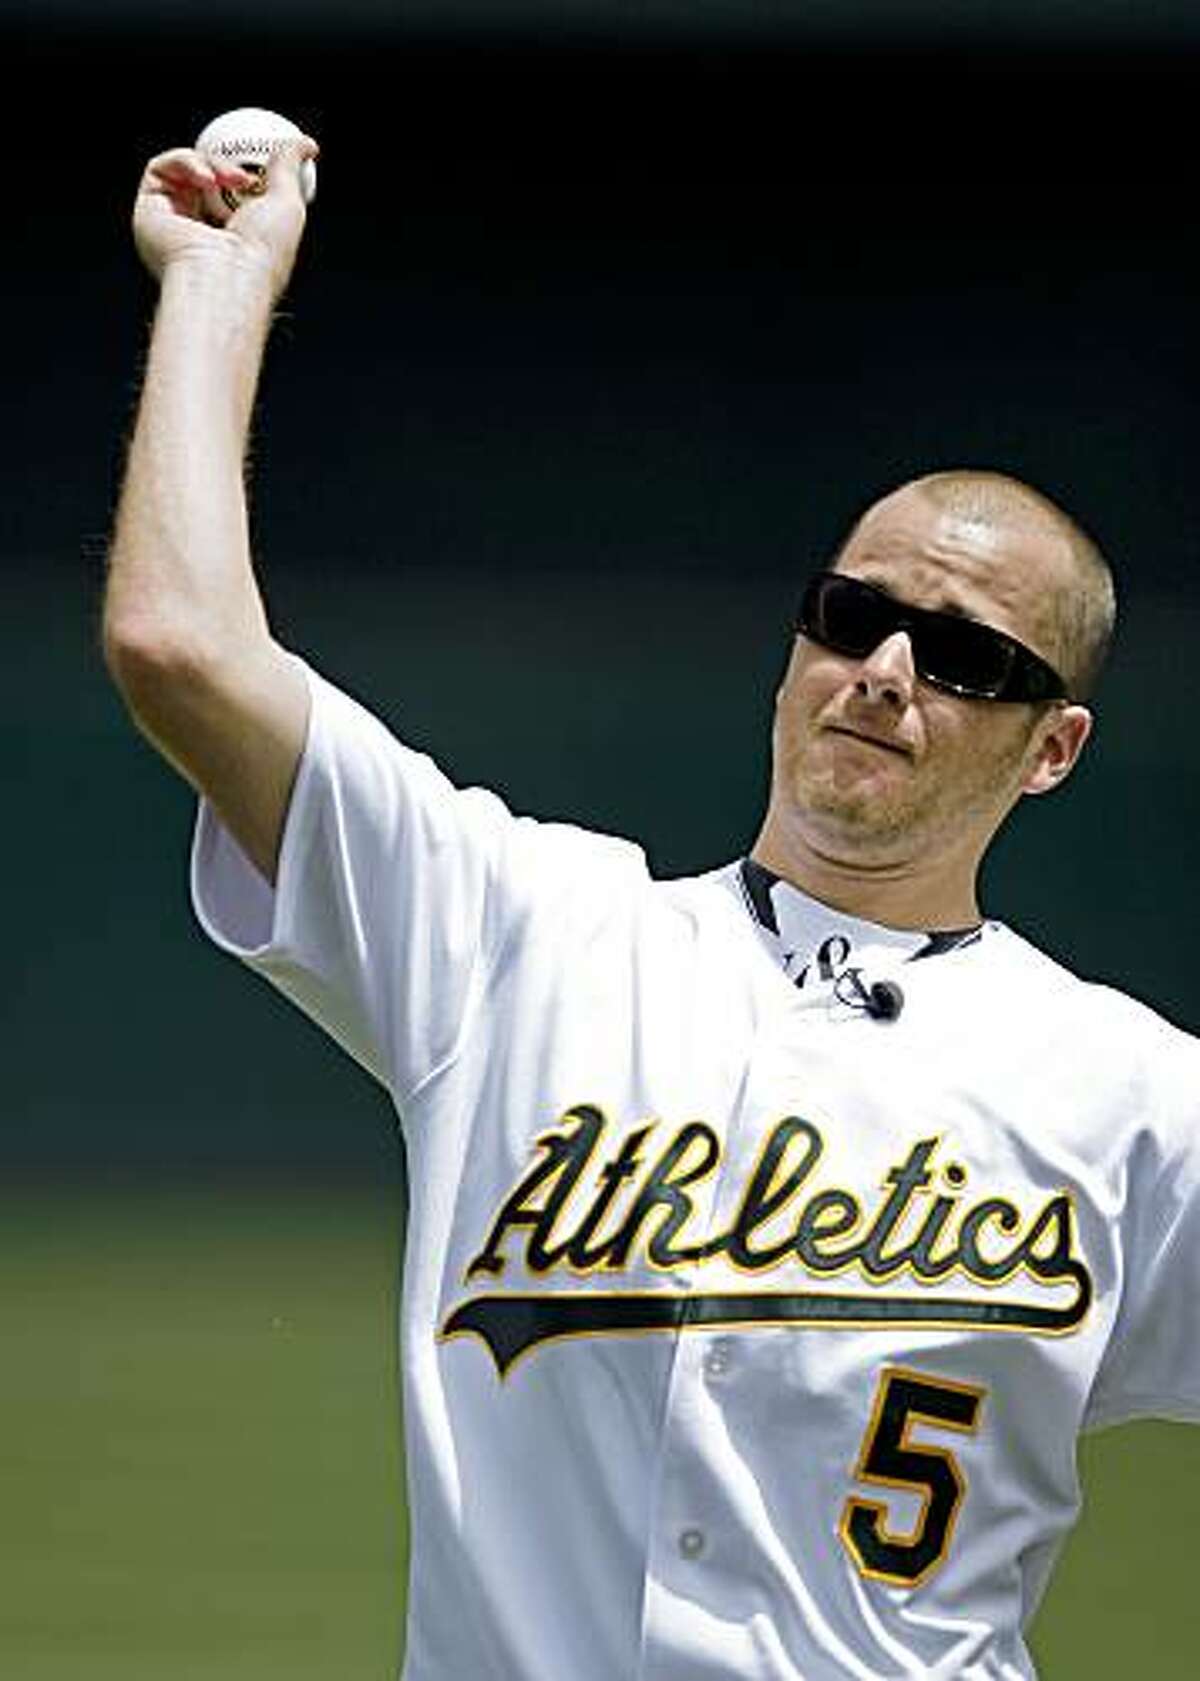 Jon Wilhite, former Cal State Fullerton baseball star, throws the ceremonial first pitch to his former teammate, Oakland Athletics catcher Kurt Suzuki, not shown, before a baseball game between the A's and the Los Angeles Angels, Saturday, July 18, 2009, in Oakland, Calif. Wilhite is the sole survivor of the April 9 car crash that killed Angels pitcher Nick Adenhart, Henry Pearson and Courtney Stewart. (AP Photo/Ben Margot)